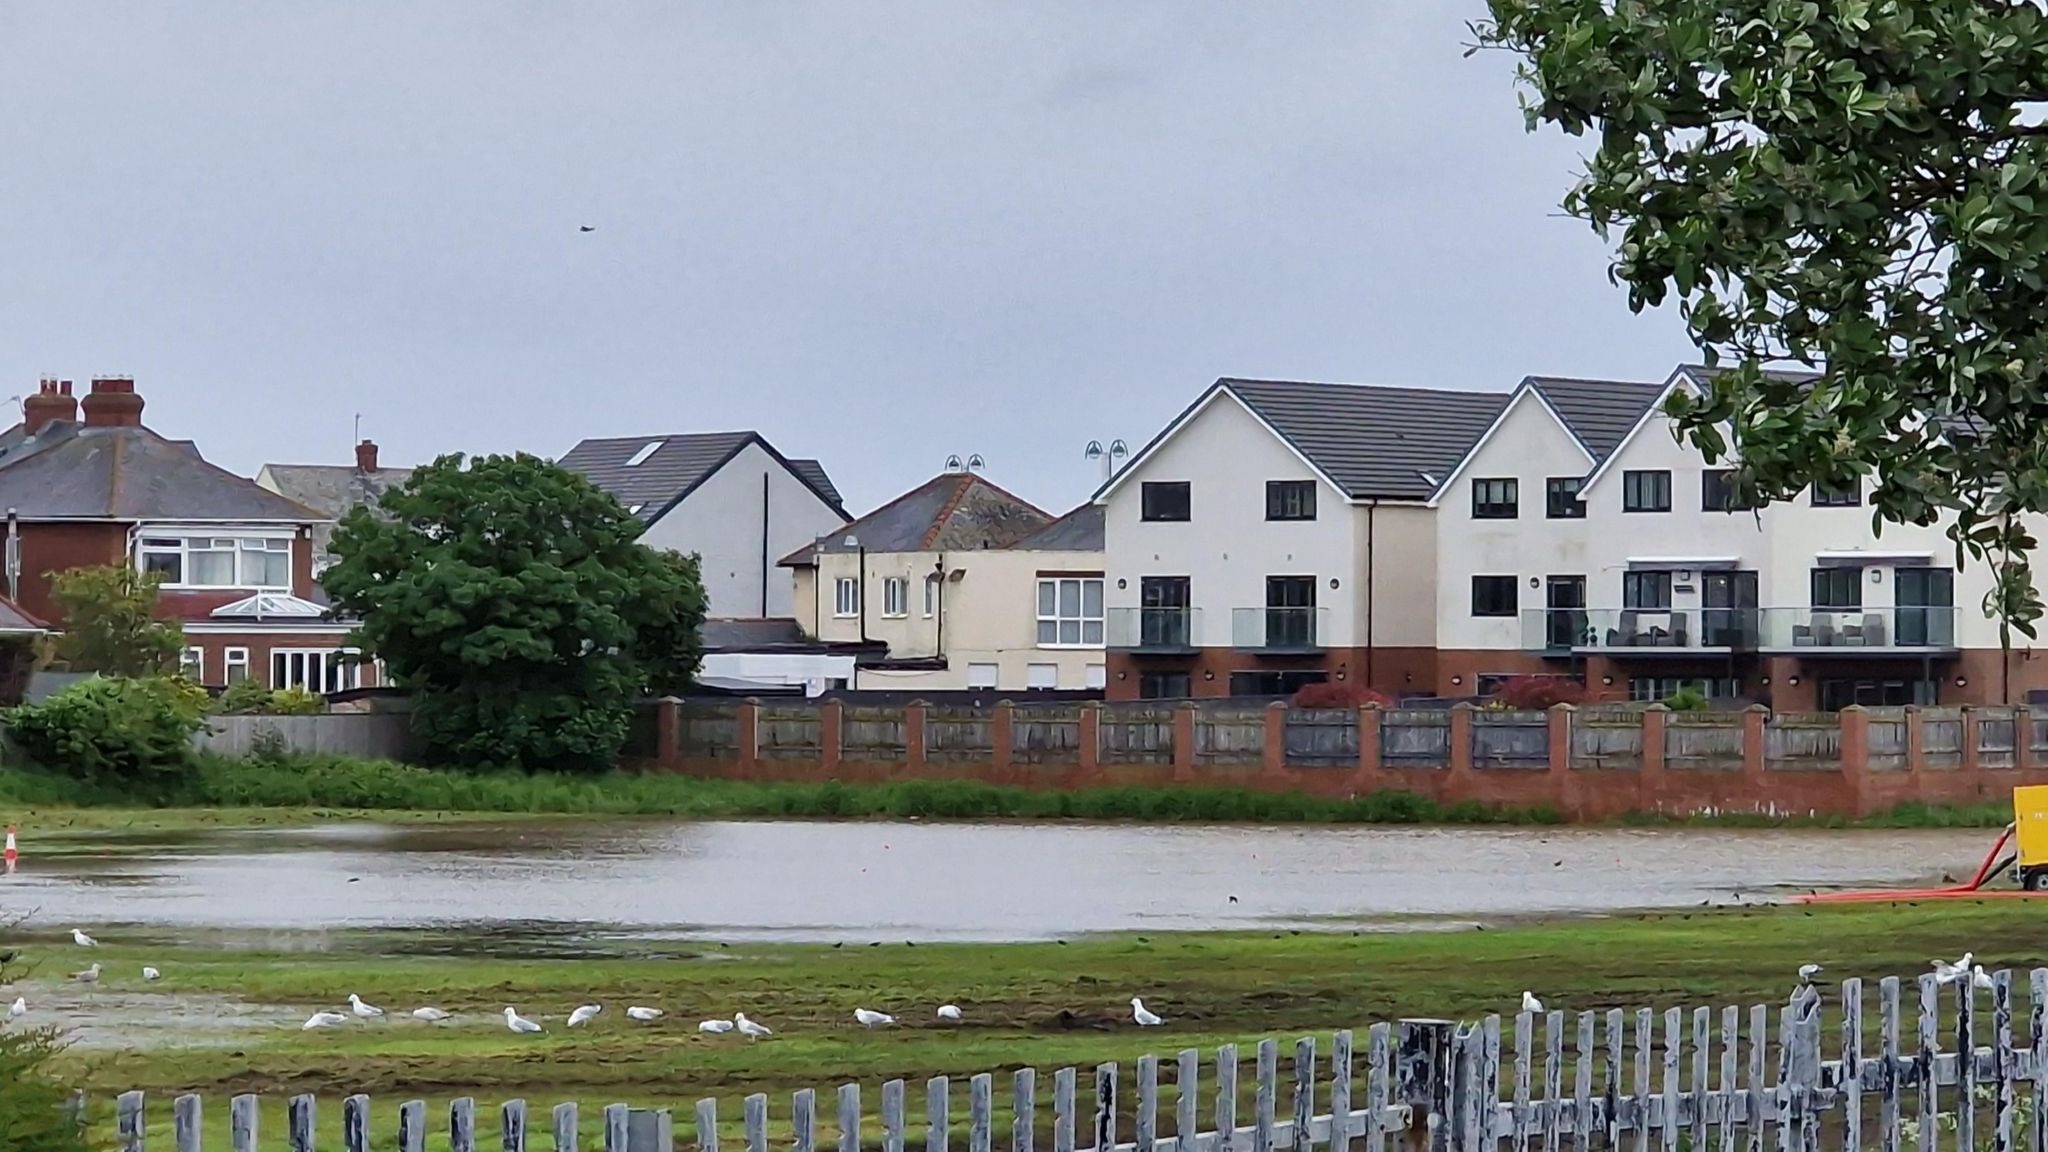 How the flooded site looks now